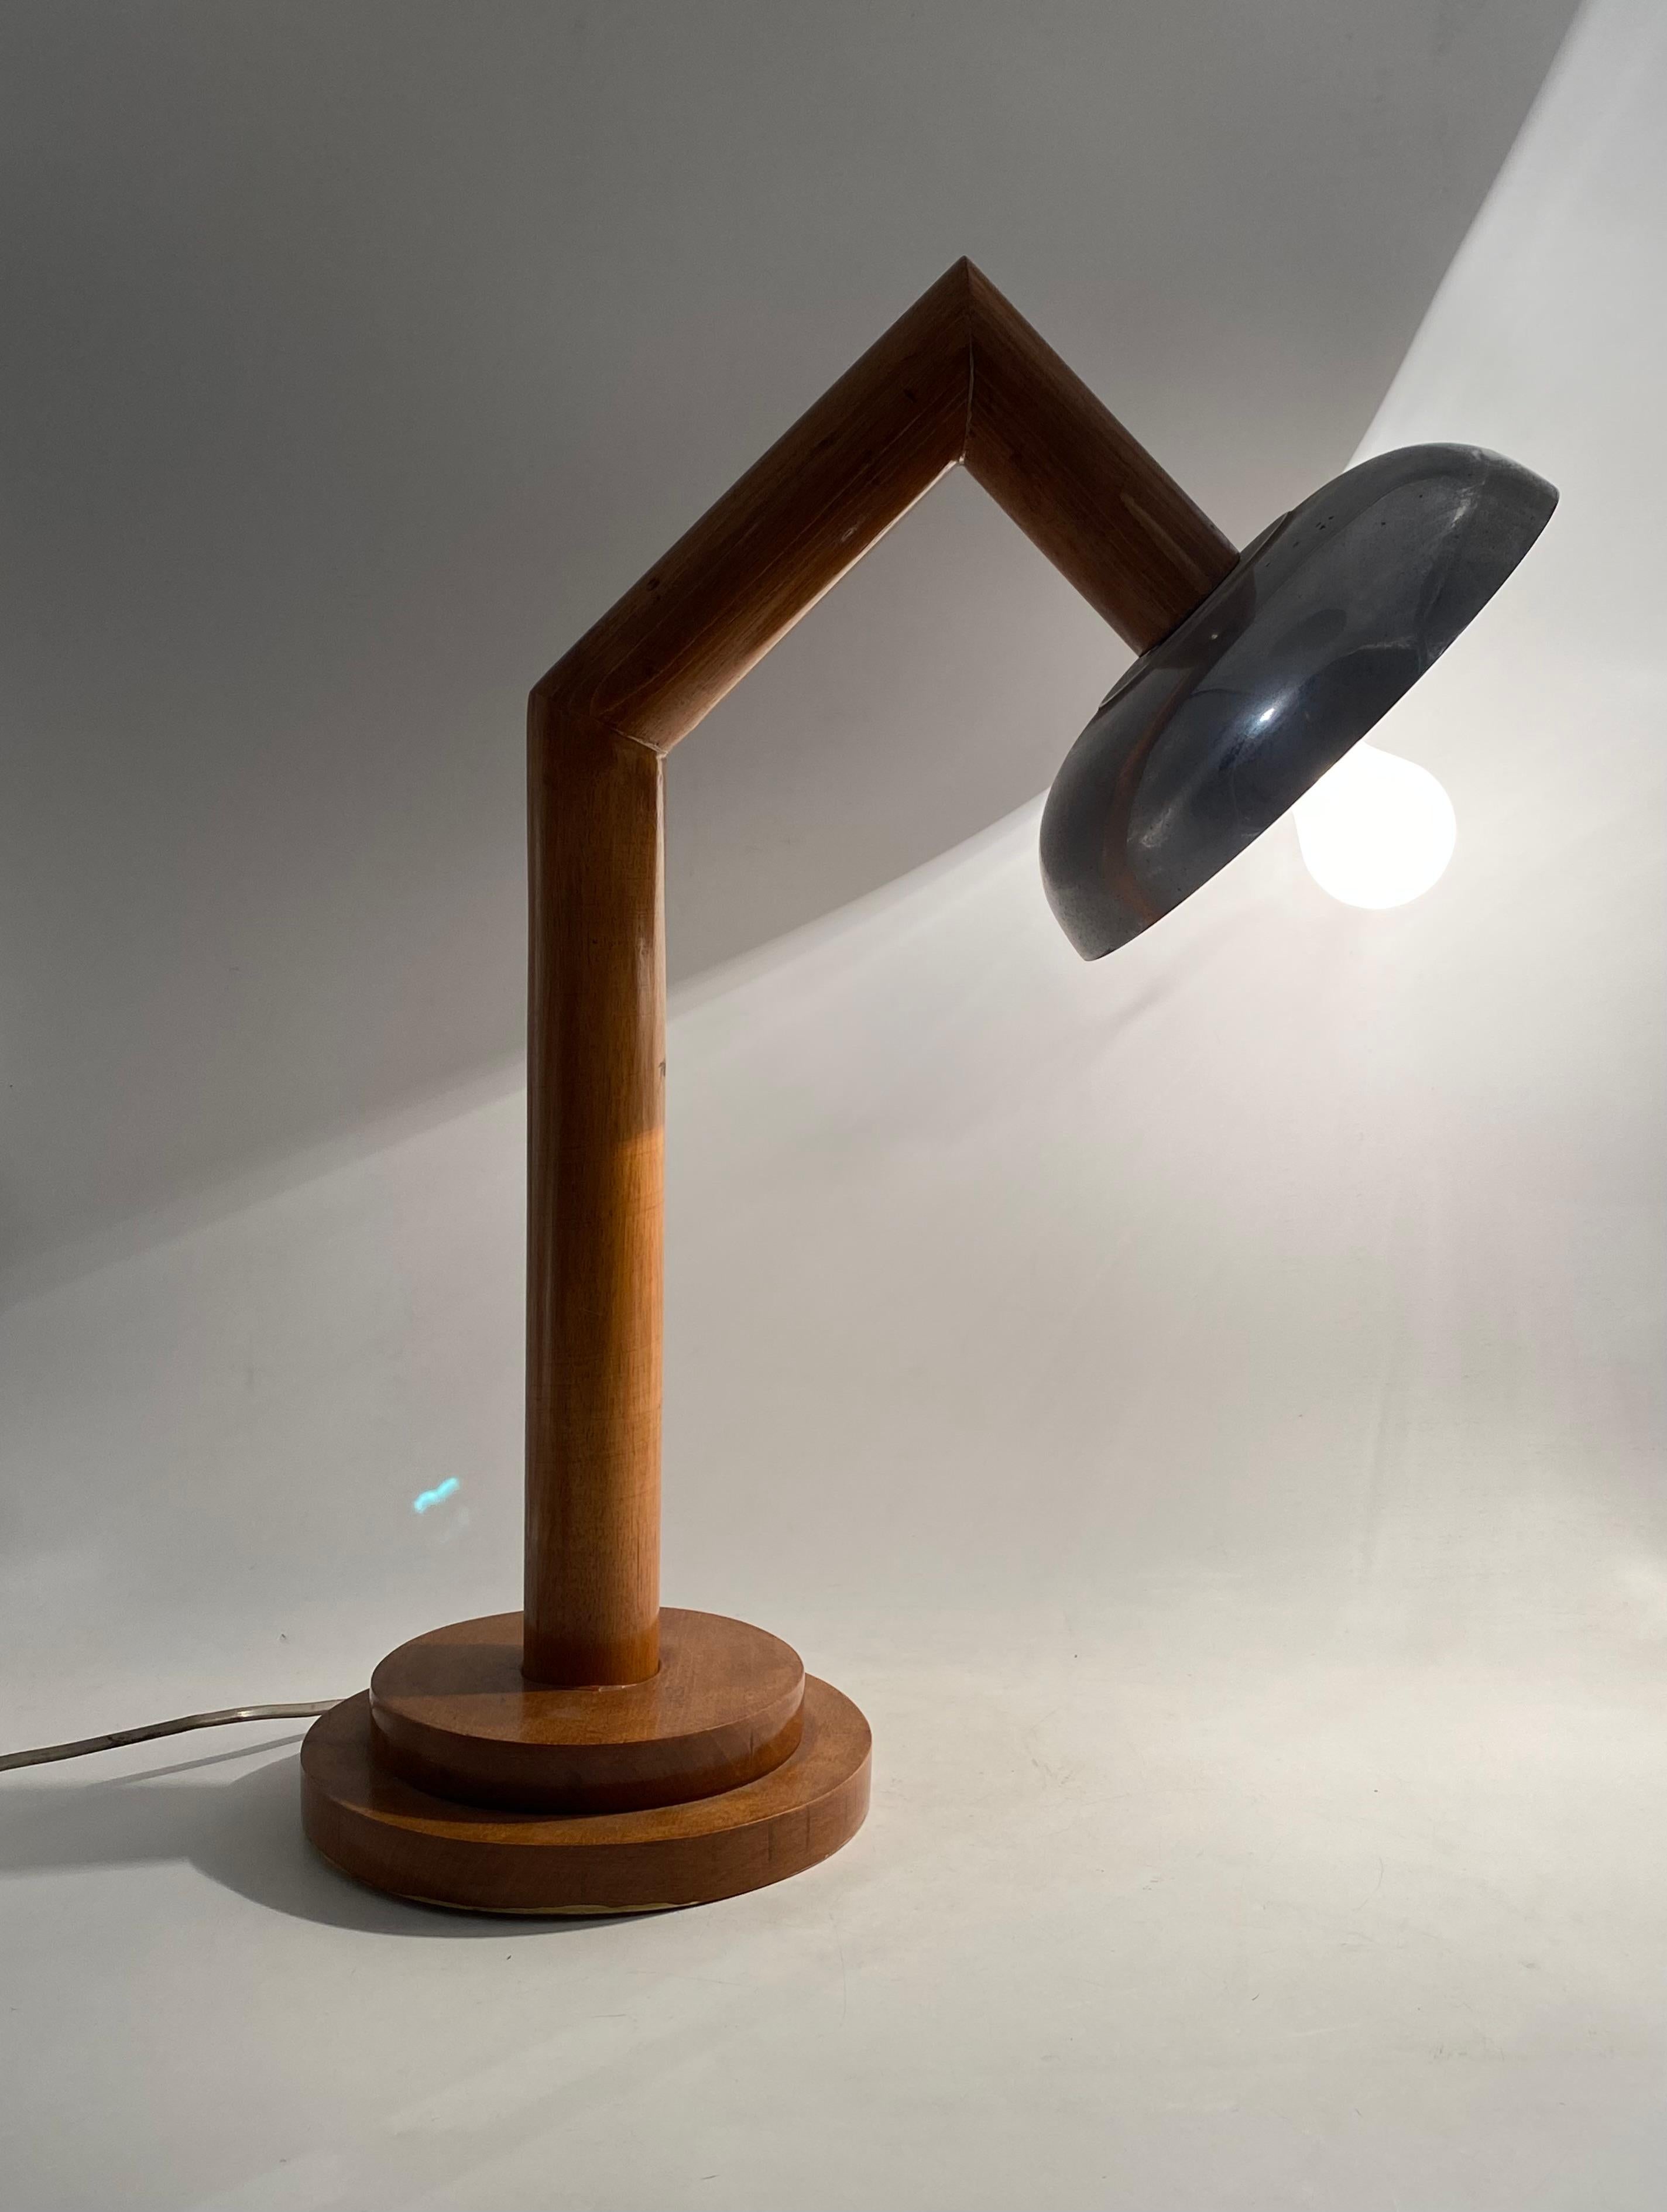 Modern wood table lamp

France circa 1940s

aluminum, wood

H 57 cm - 44 x 24 cm

Conditions: excellent consistent with age and use